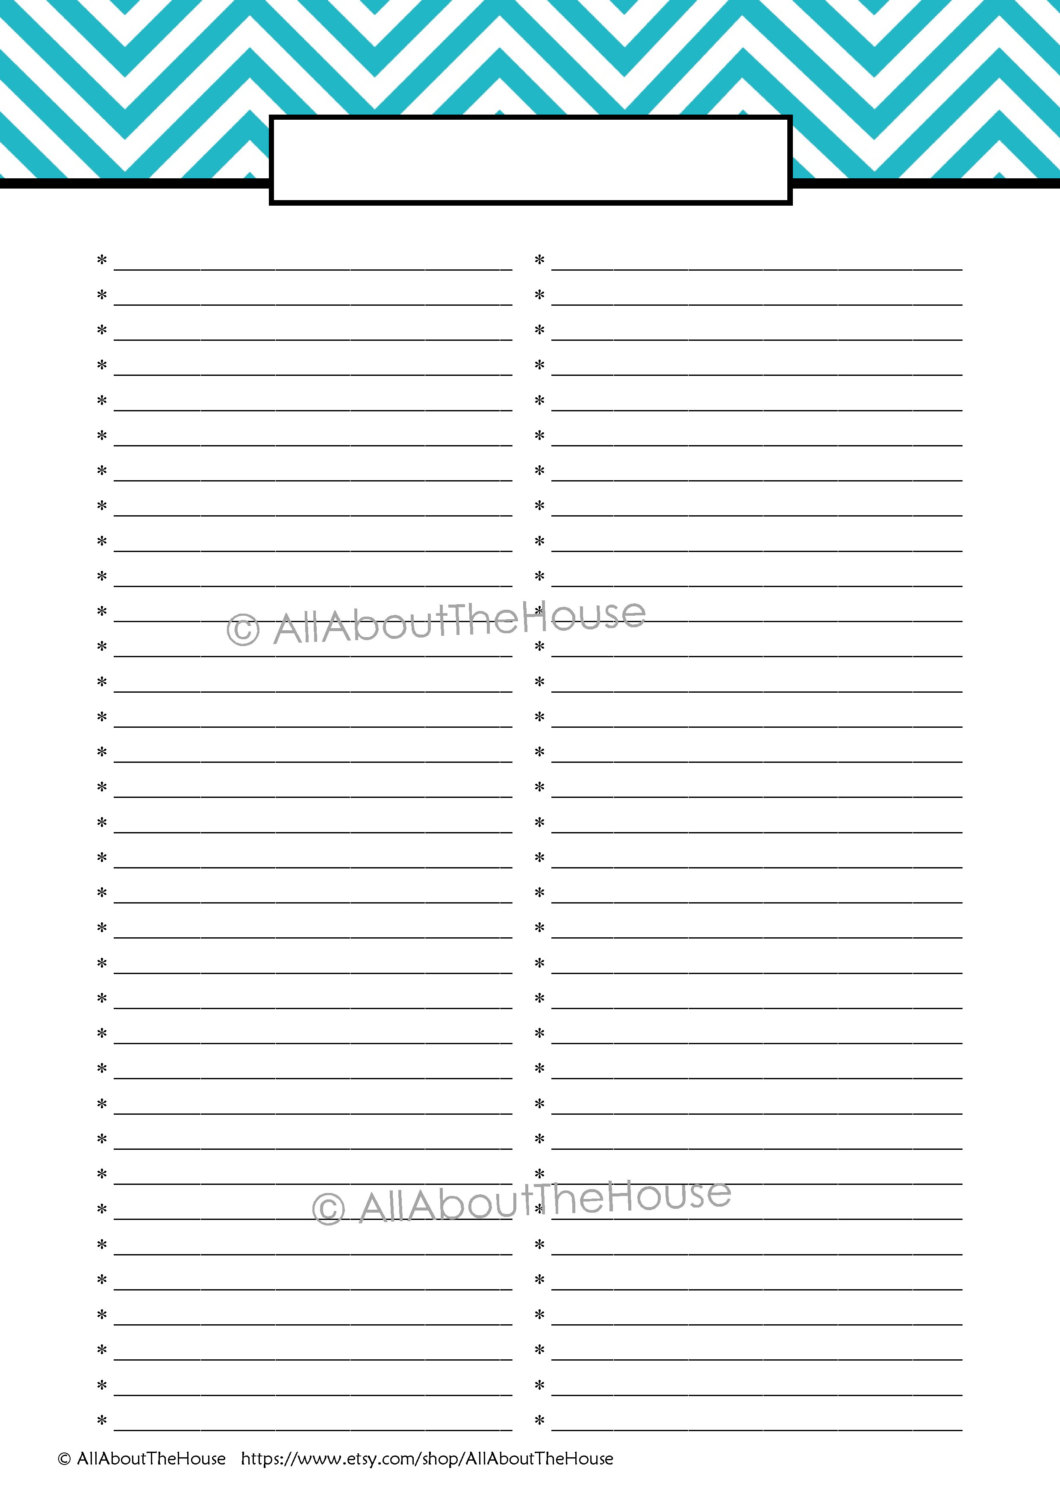 List Printable Images Gallery Category Page 1 - printablee.com